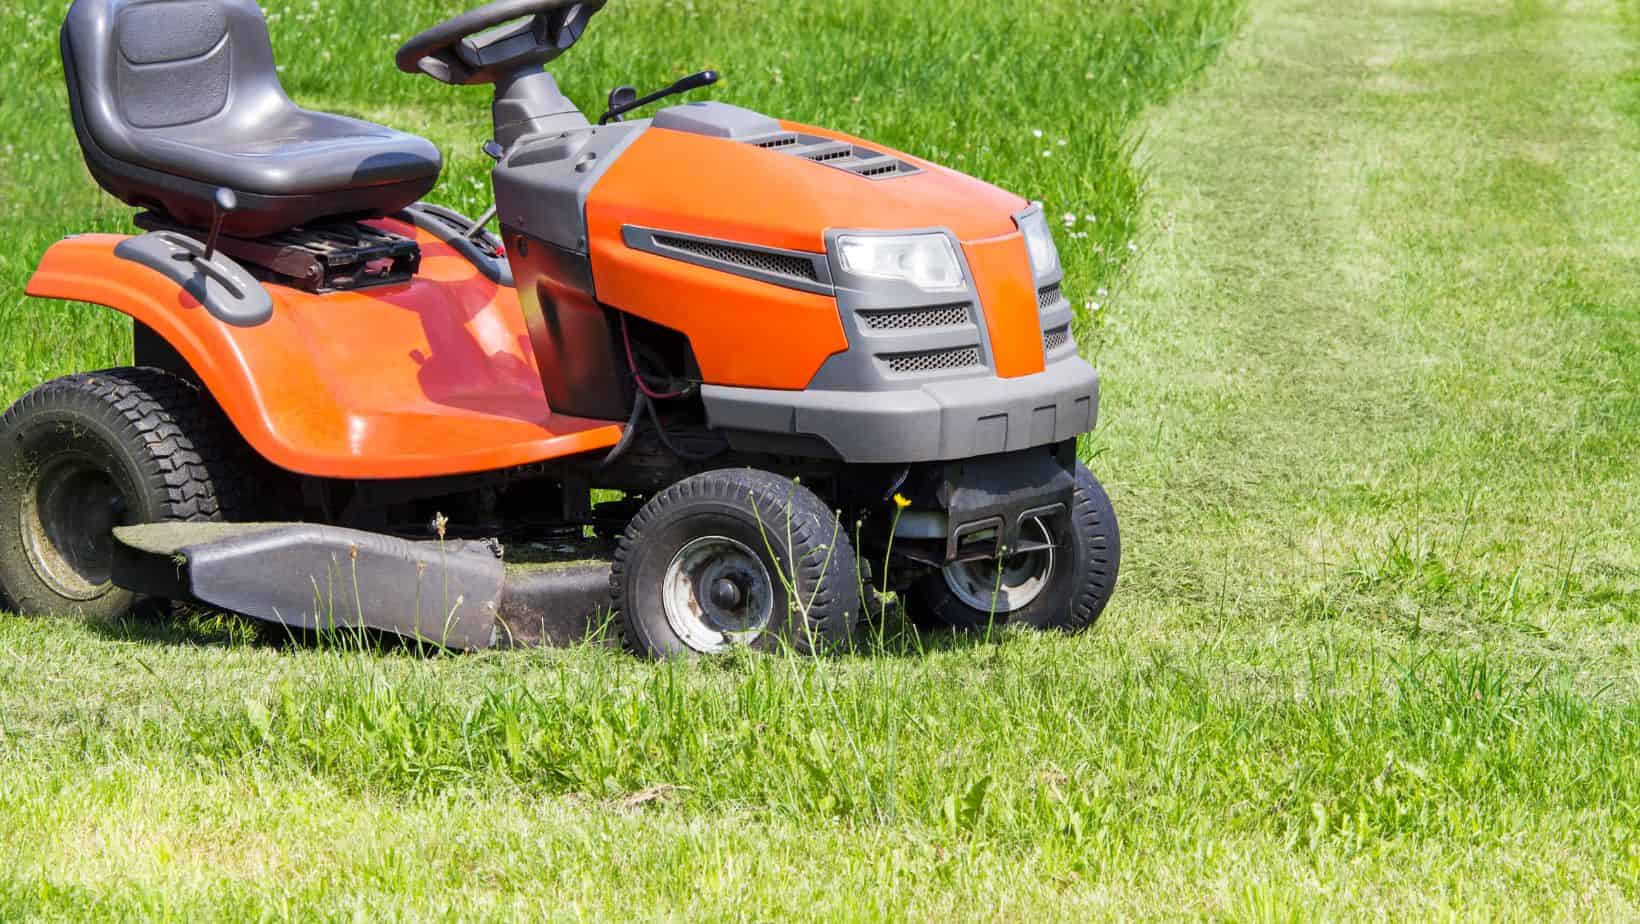 50-rebates-available-to-residents-who-buy-electric-lawn-equipment